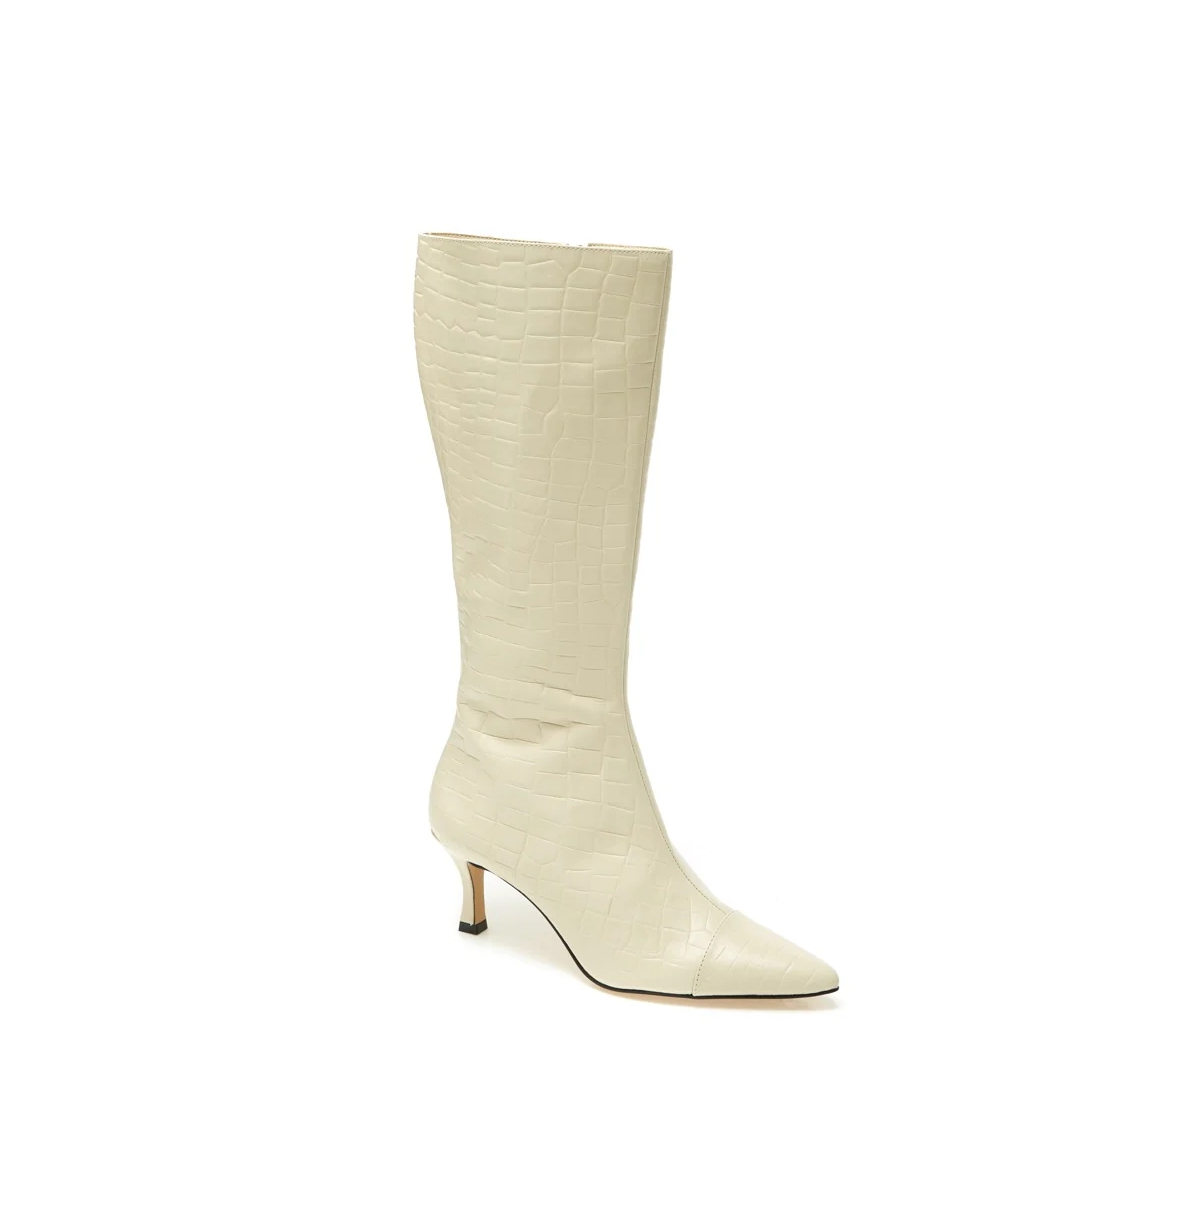 Shoes Women's Marbella High Stiletto Boots - Off white